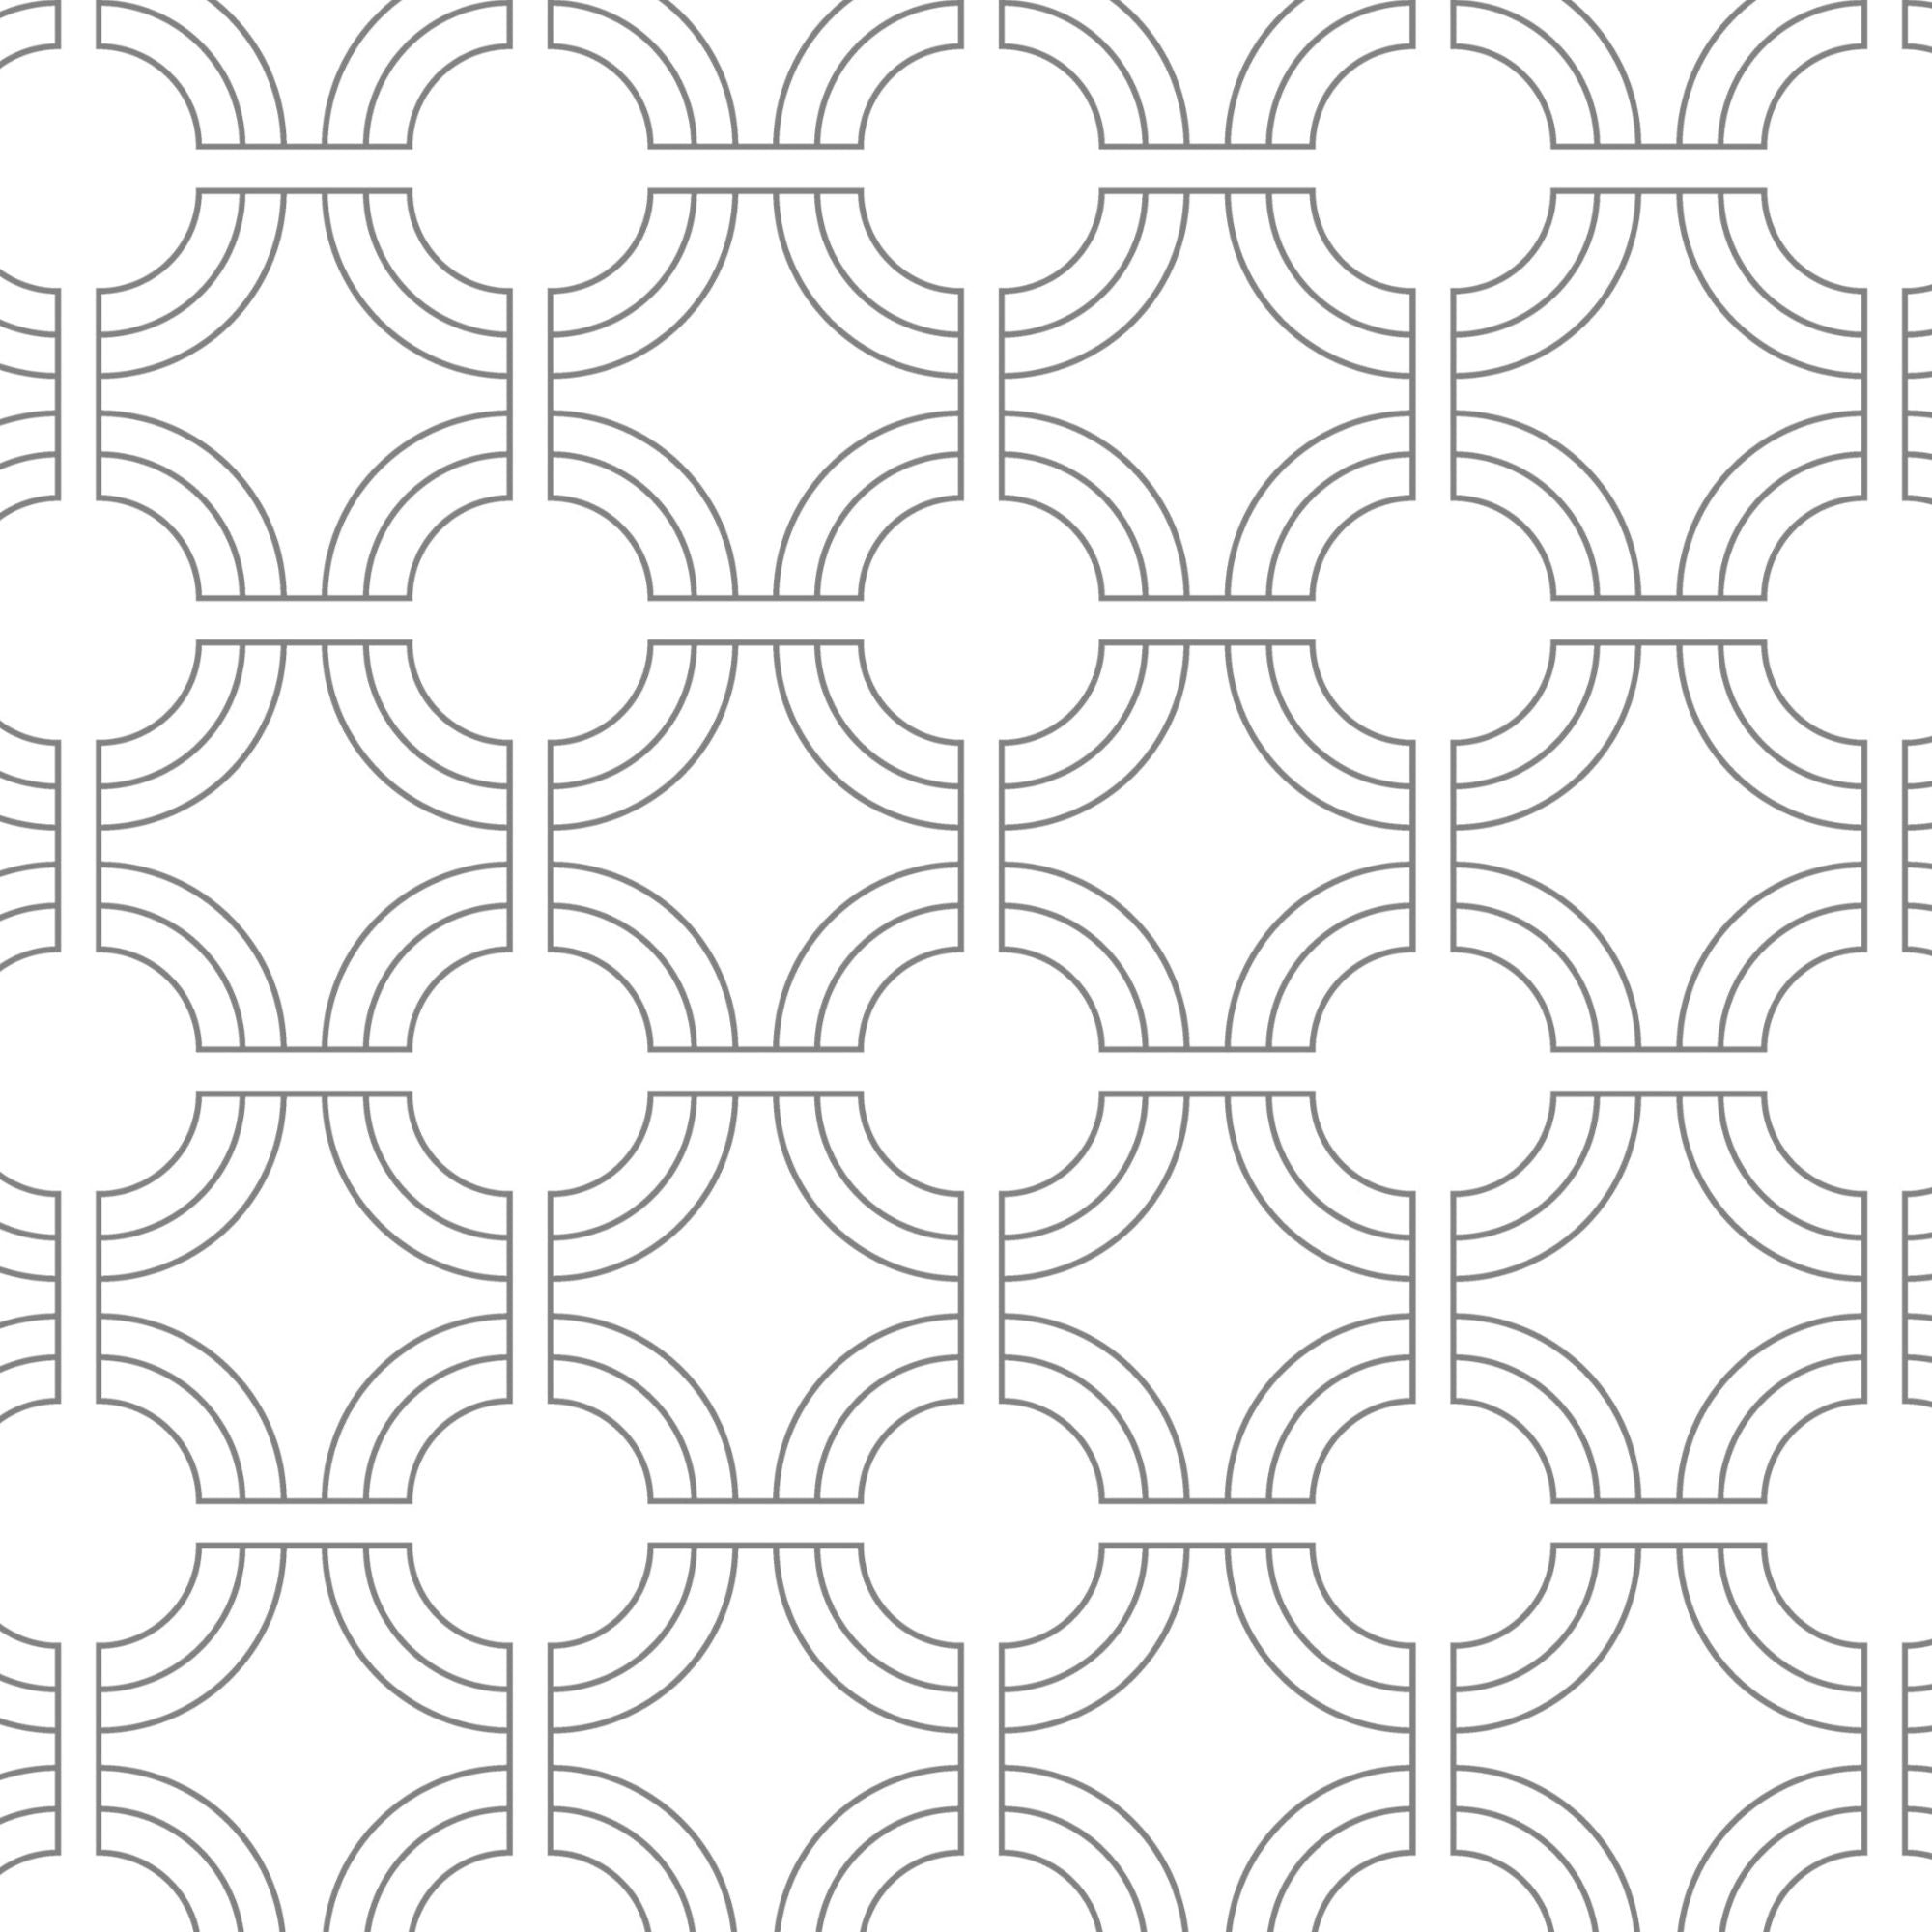 The Geometric Wallpaper displays a continuous, monochromatic pattern of interlocking circles and lines, creating an optical illusion of depth and movement. Its design is a contemporary interpretation of Art Deco style, ideal for adding an element of architectural interest to any space.